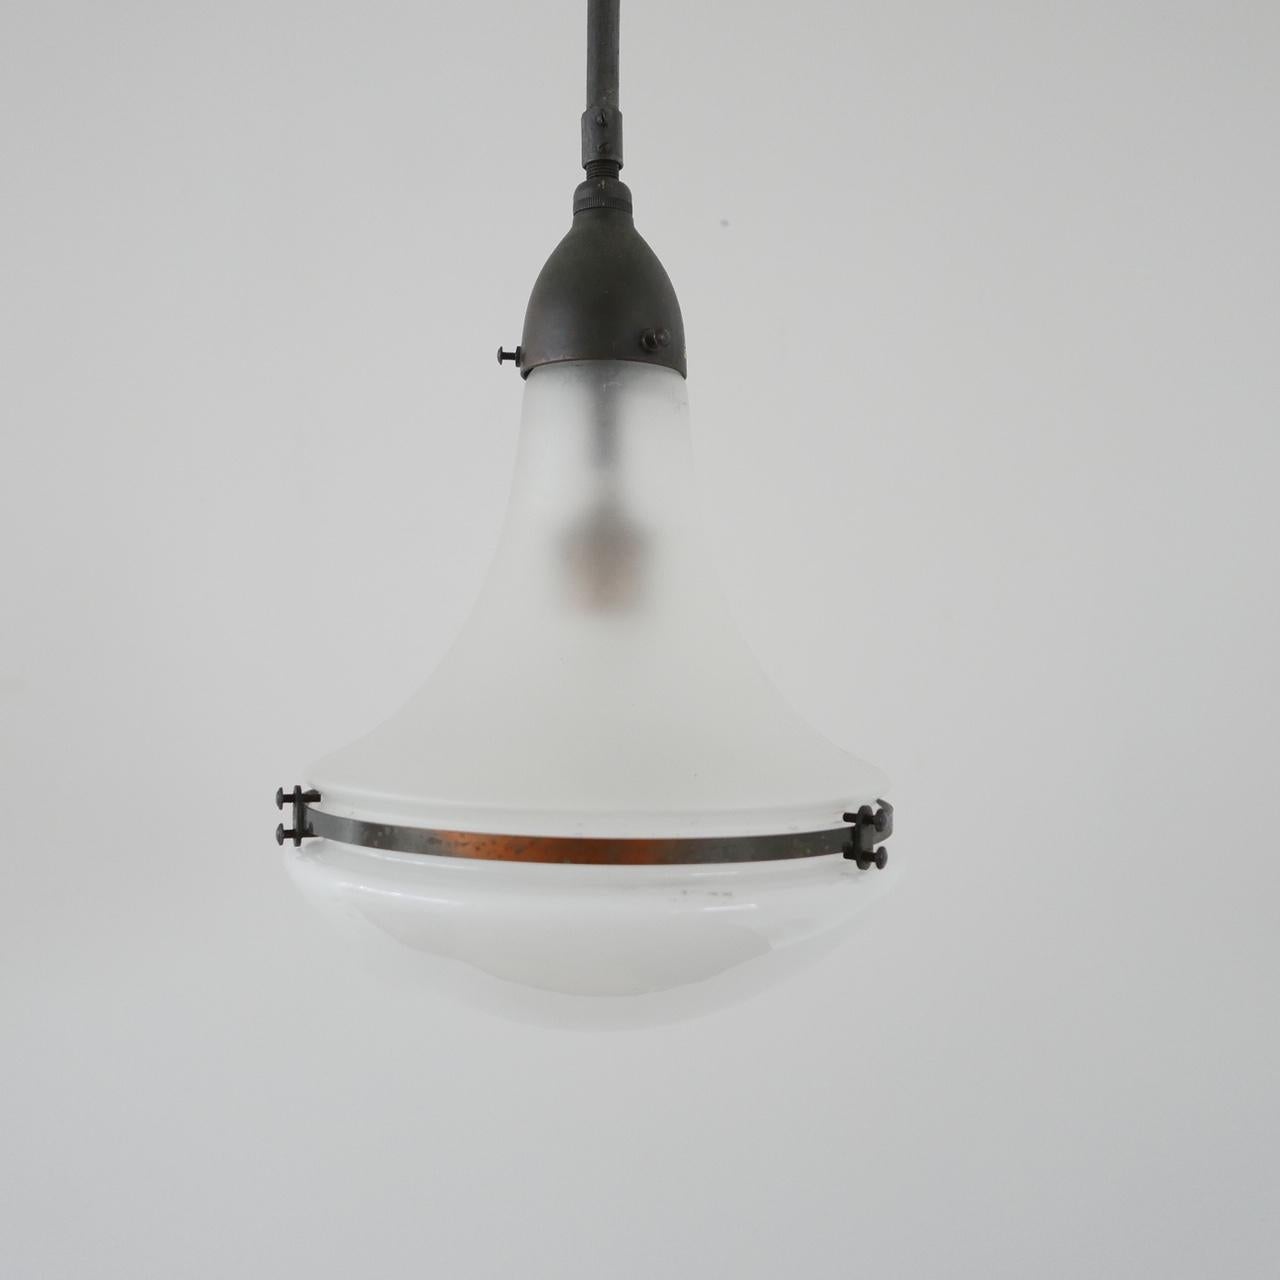 A rare Peter Behrens pendant light,

circa 1920s, for Siemens, Germany. 

Bauhaus era. The Smaller model. 

Original patinated gallery with stem and original ceiling rose. 

The stem can be cut down by any electrician or we can arrange to do